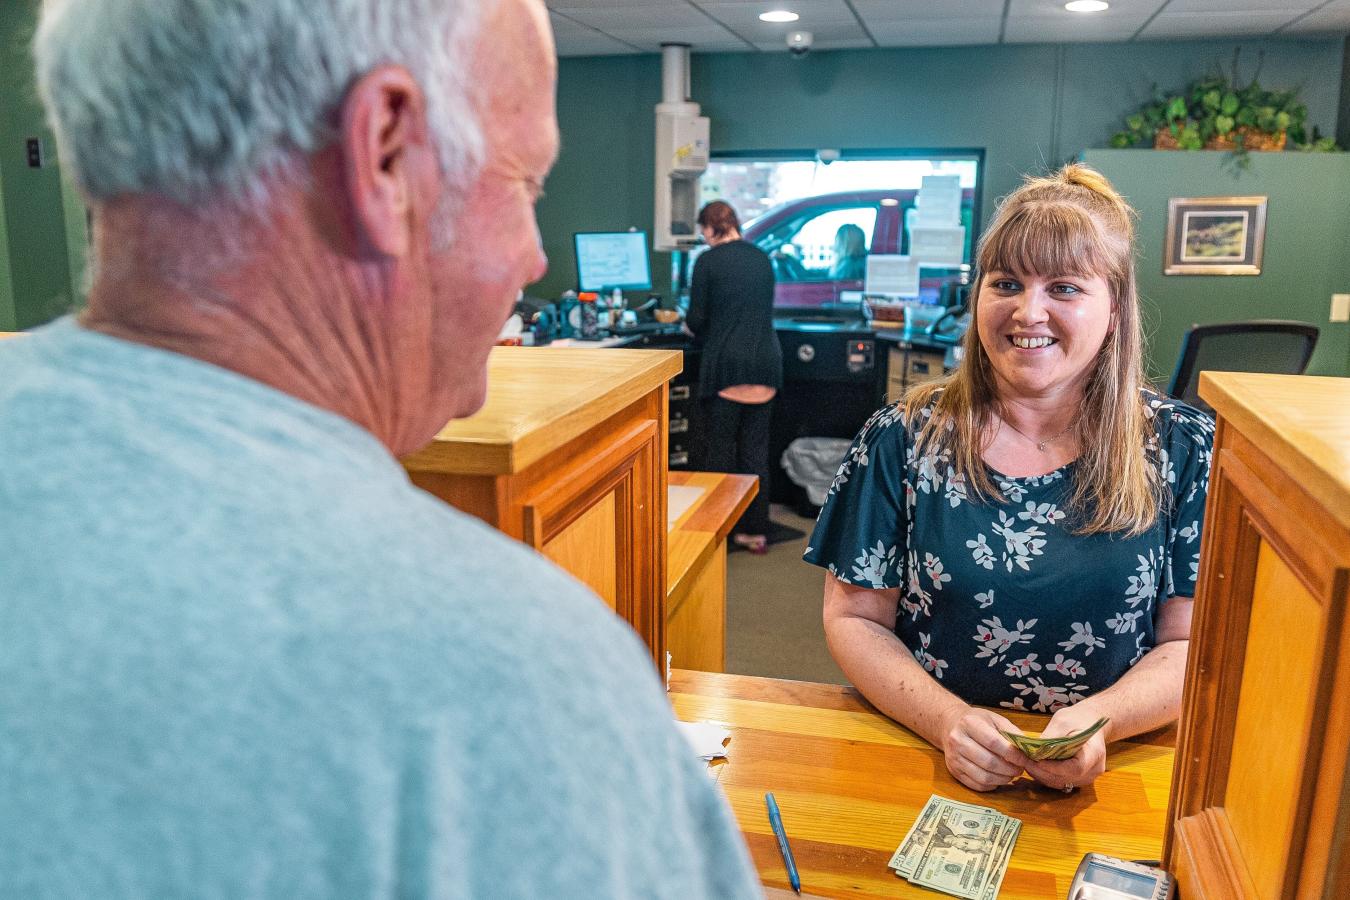 Credit Union teller interacting with customer.